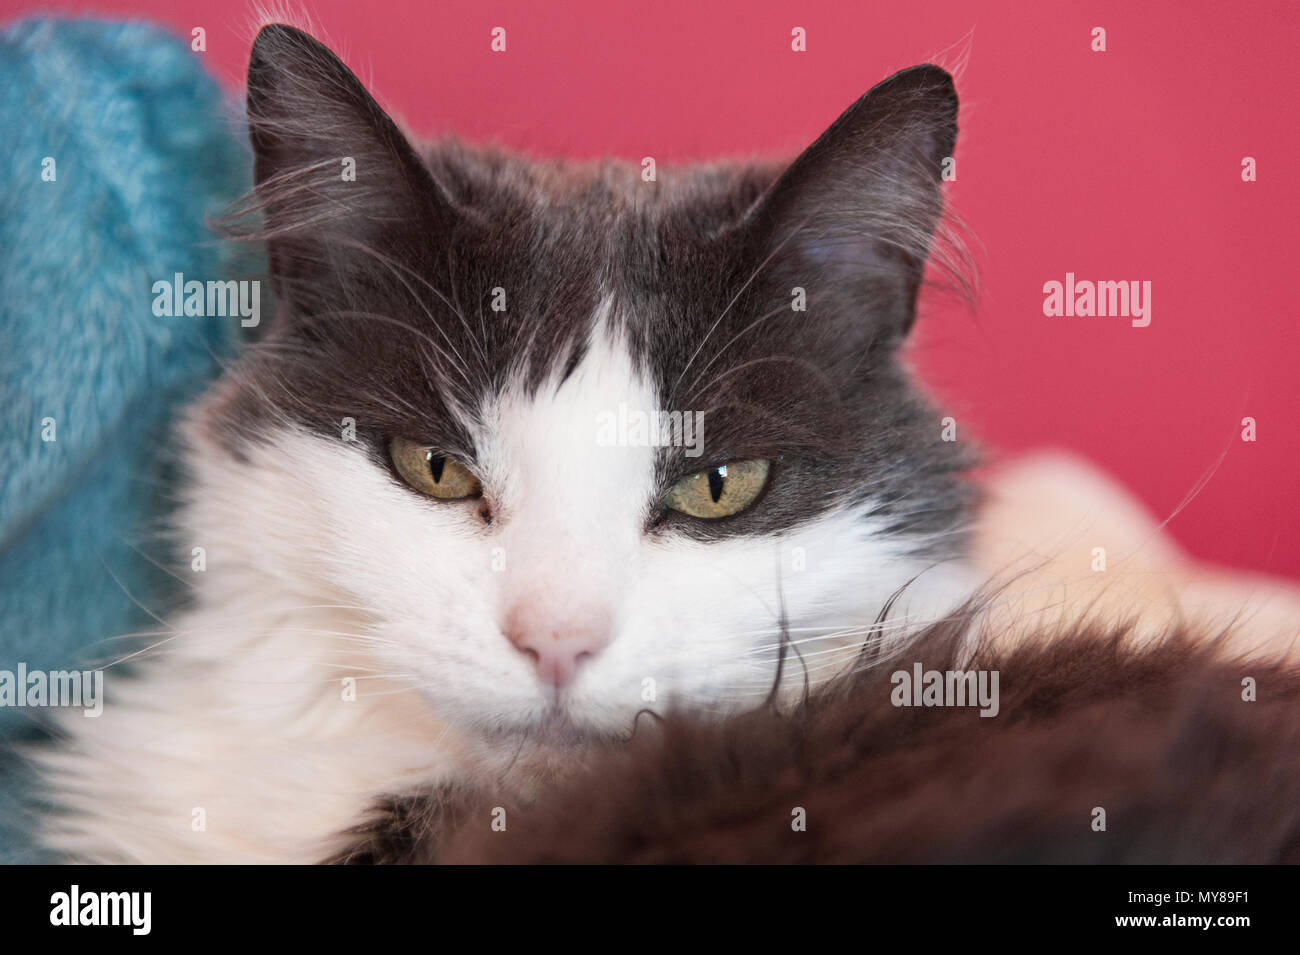 Cat on pink background Stock Photo